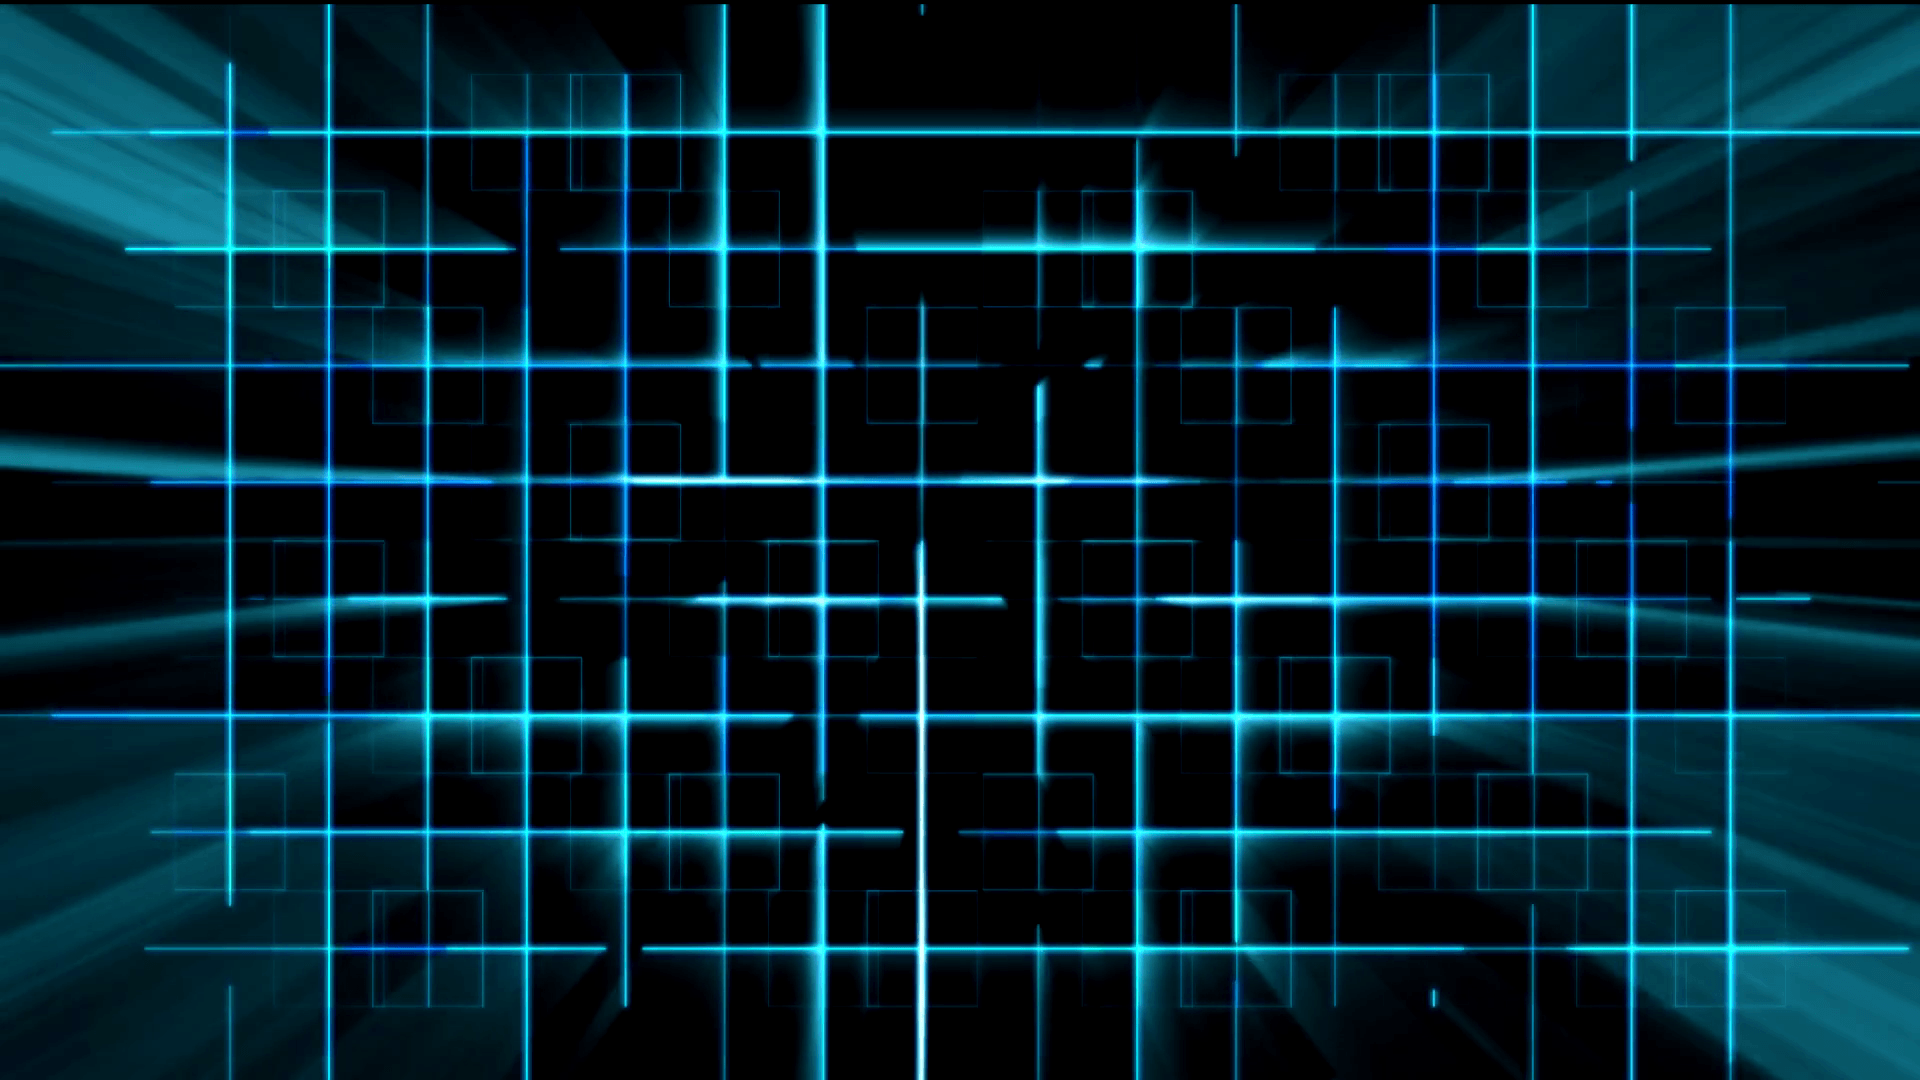 Tron Blue A.I. Cyber Grid with Light Rays Animation Background